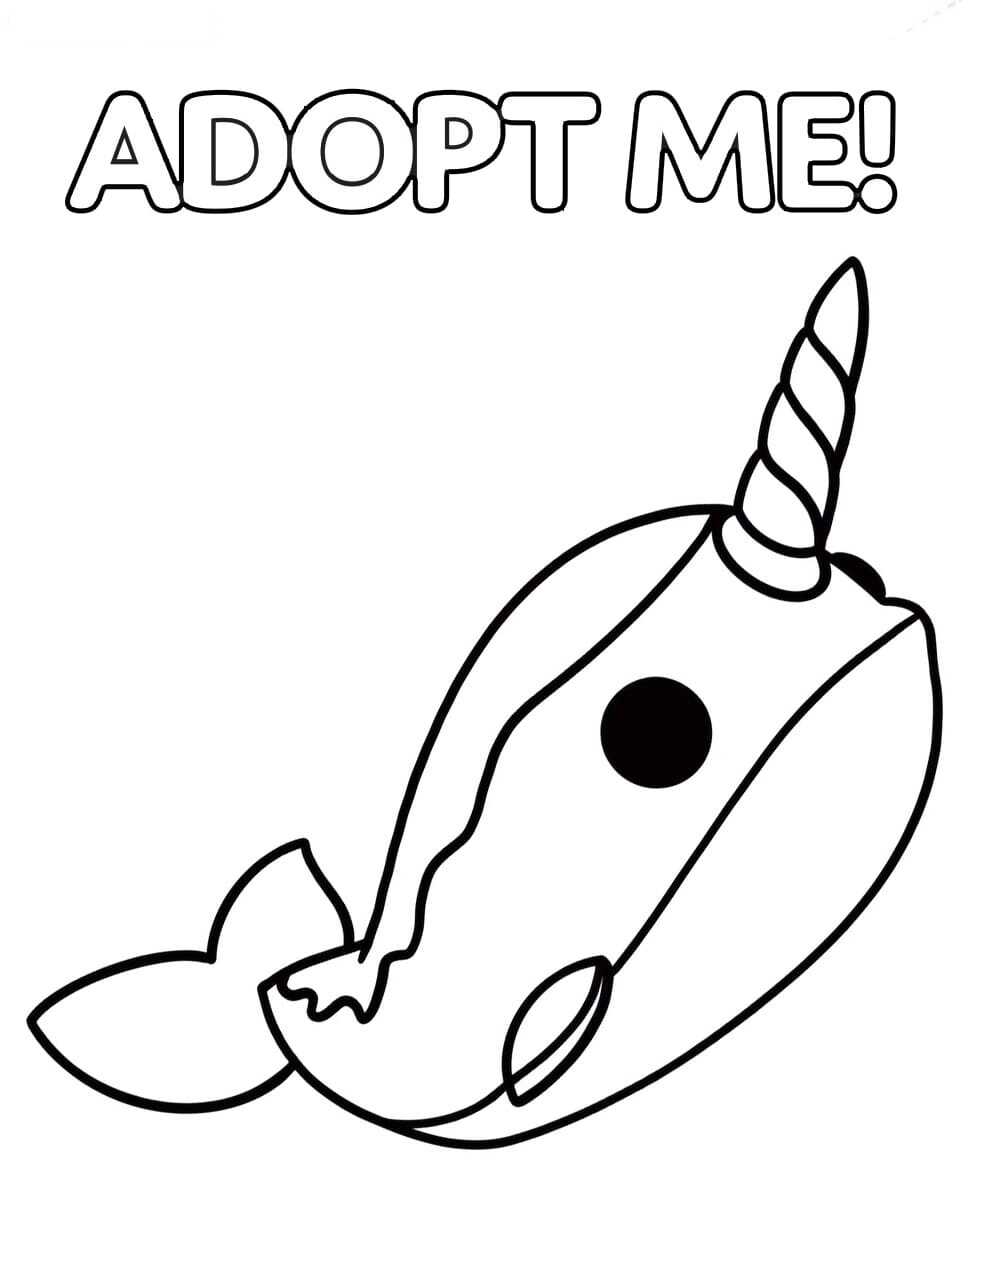 Adopt me the Narwhal has a tusk on top, with its tail fins at the ...